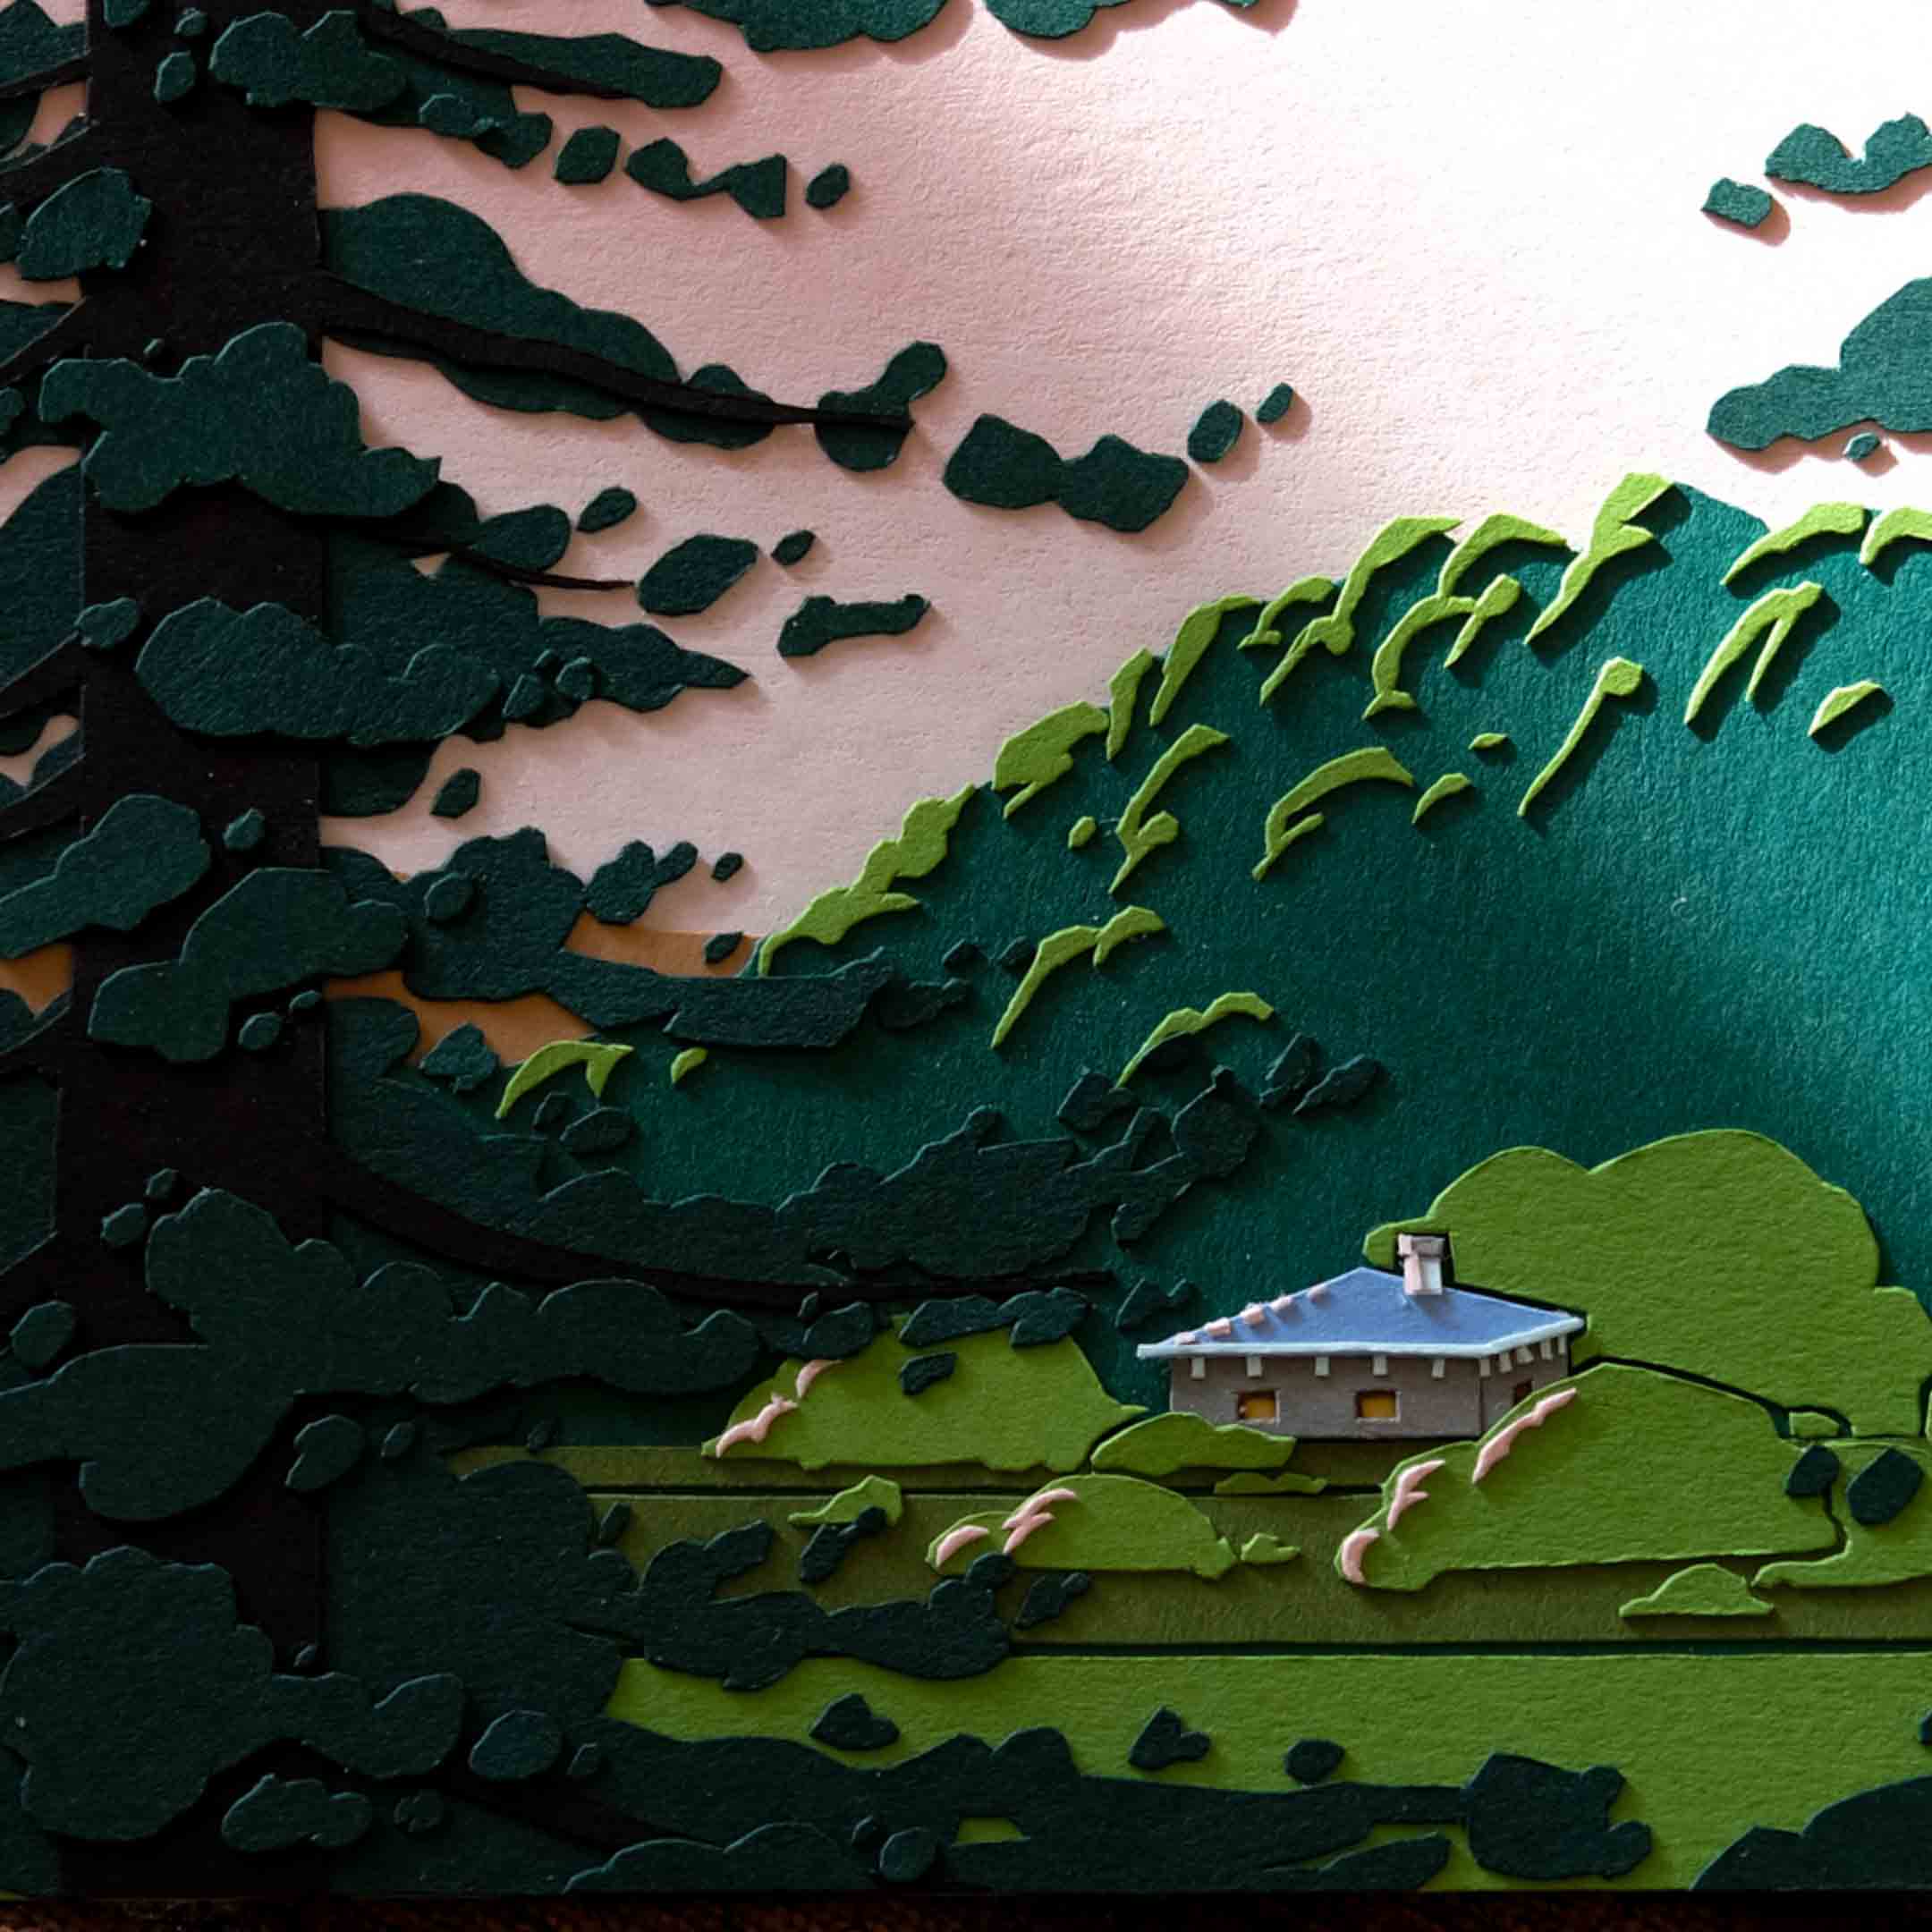 A close-up of the artwork shows the details of gray paper house and the surrounding fields and trees.